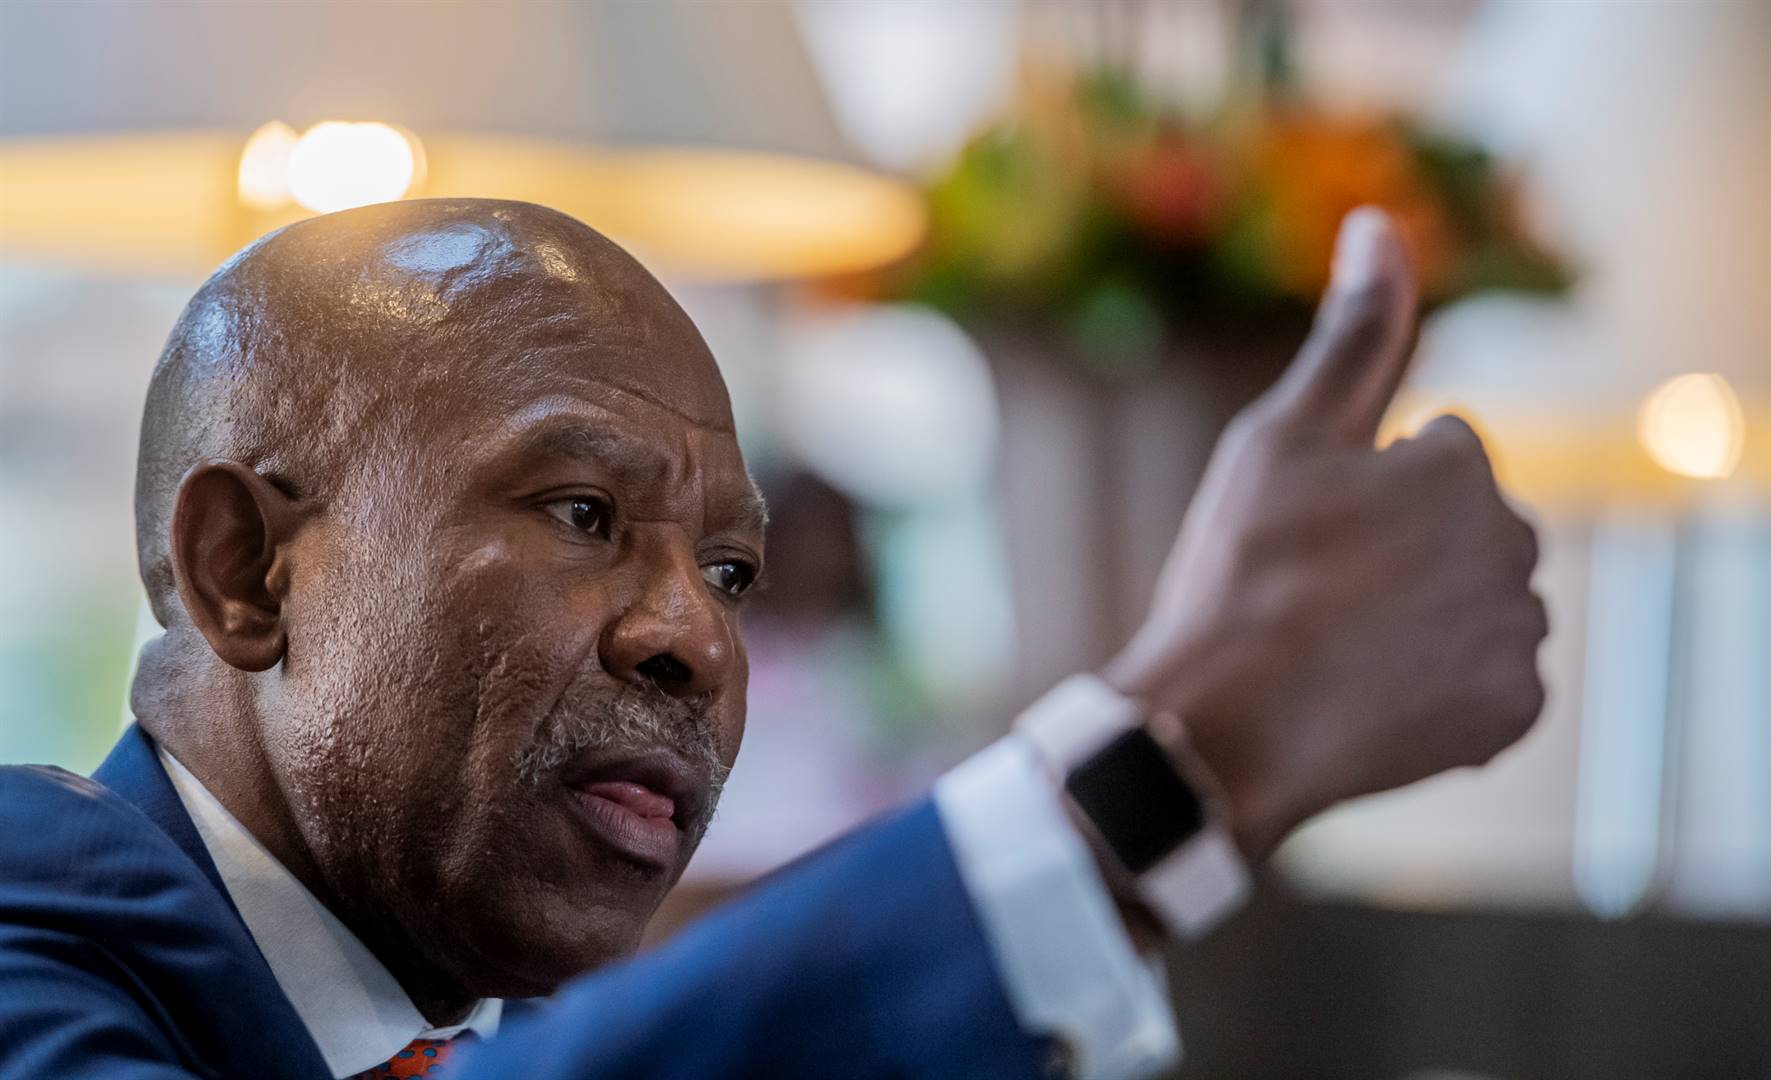 News24 | 'Job not done' on inflation, Kganyago says